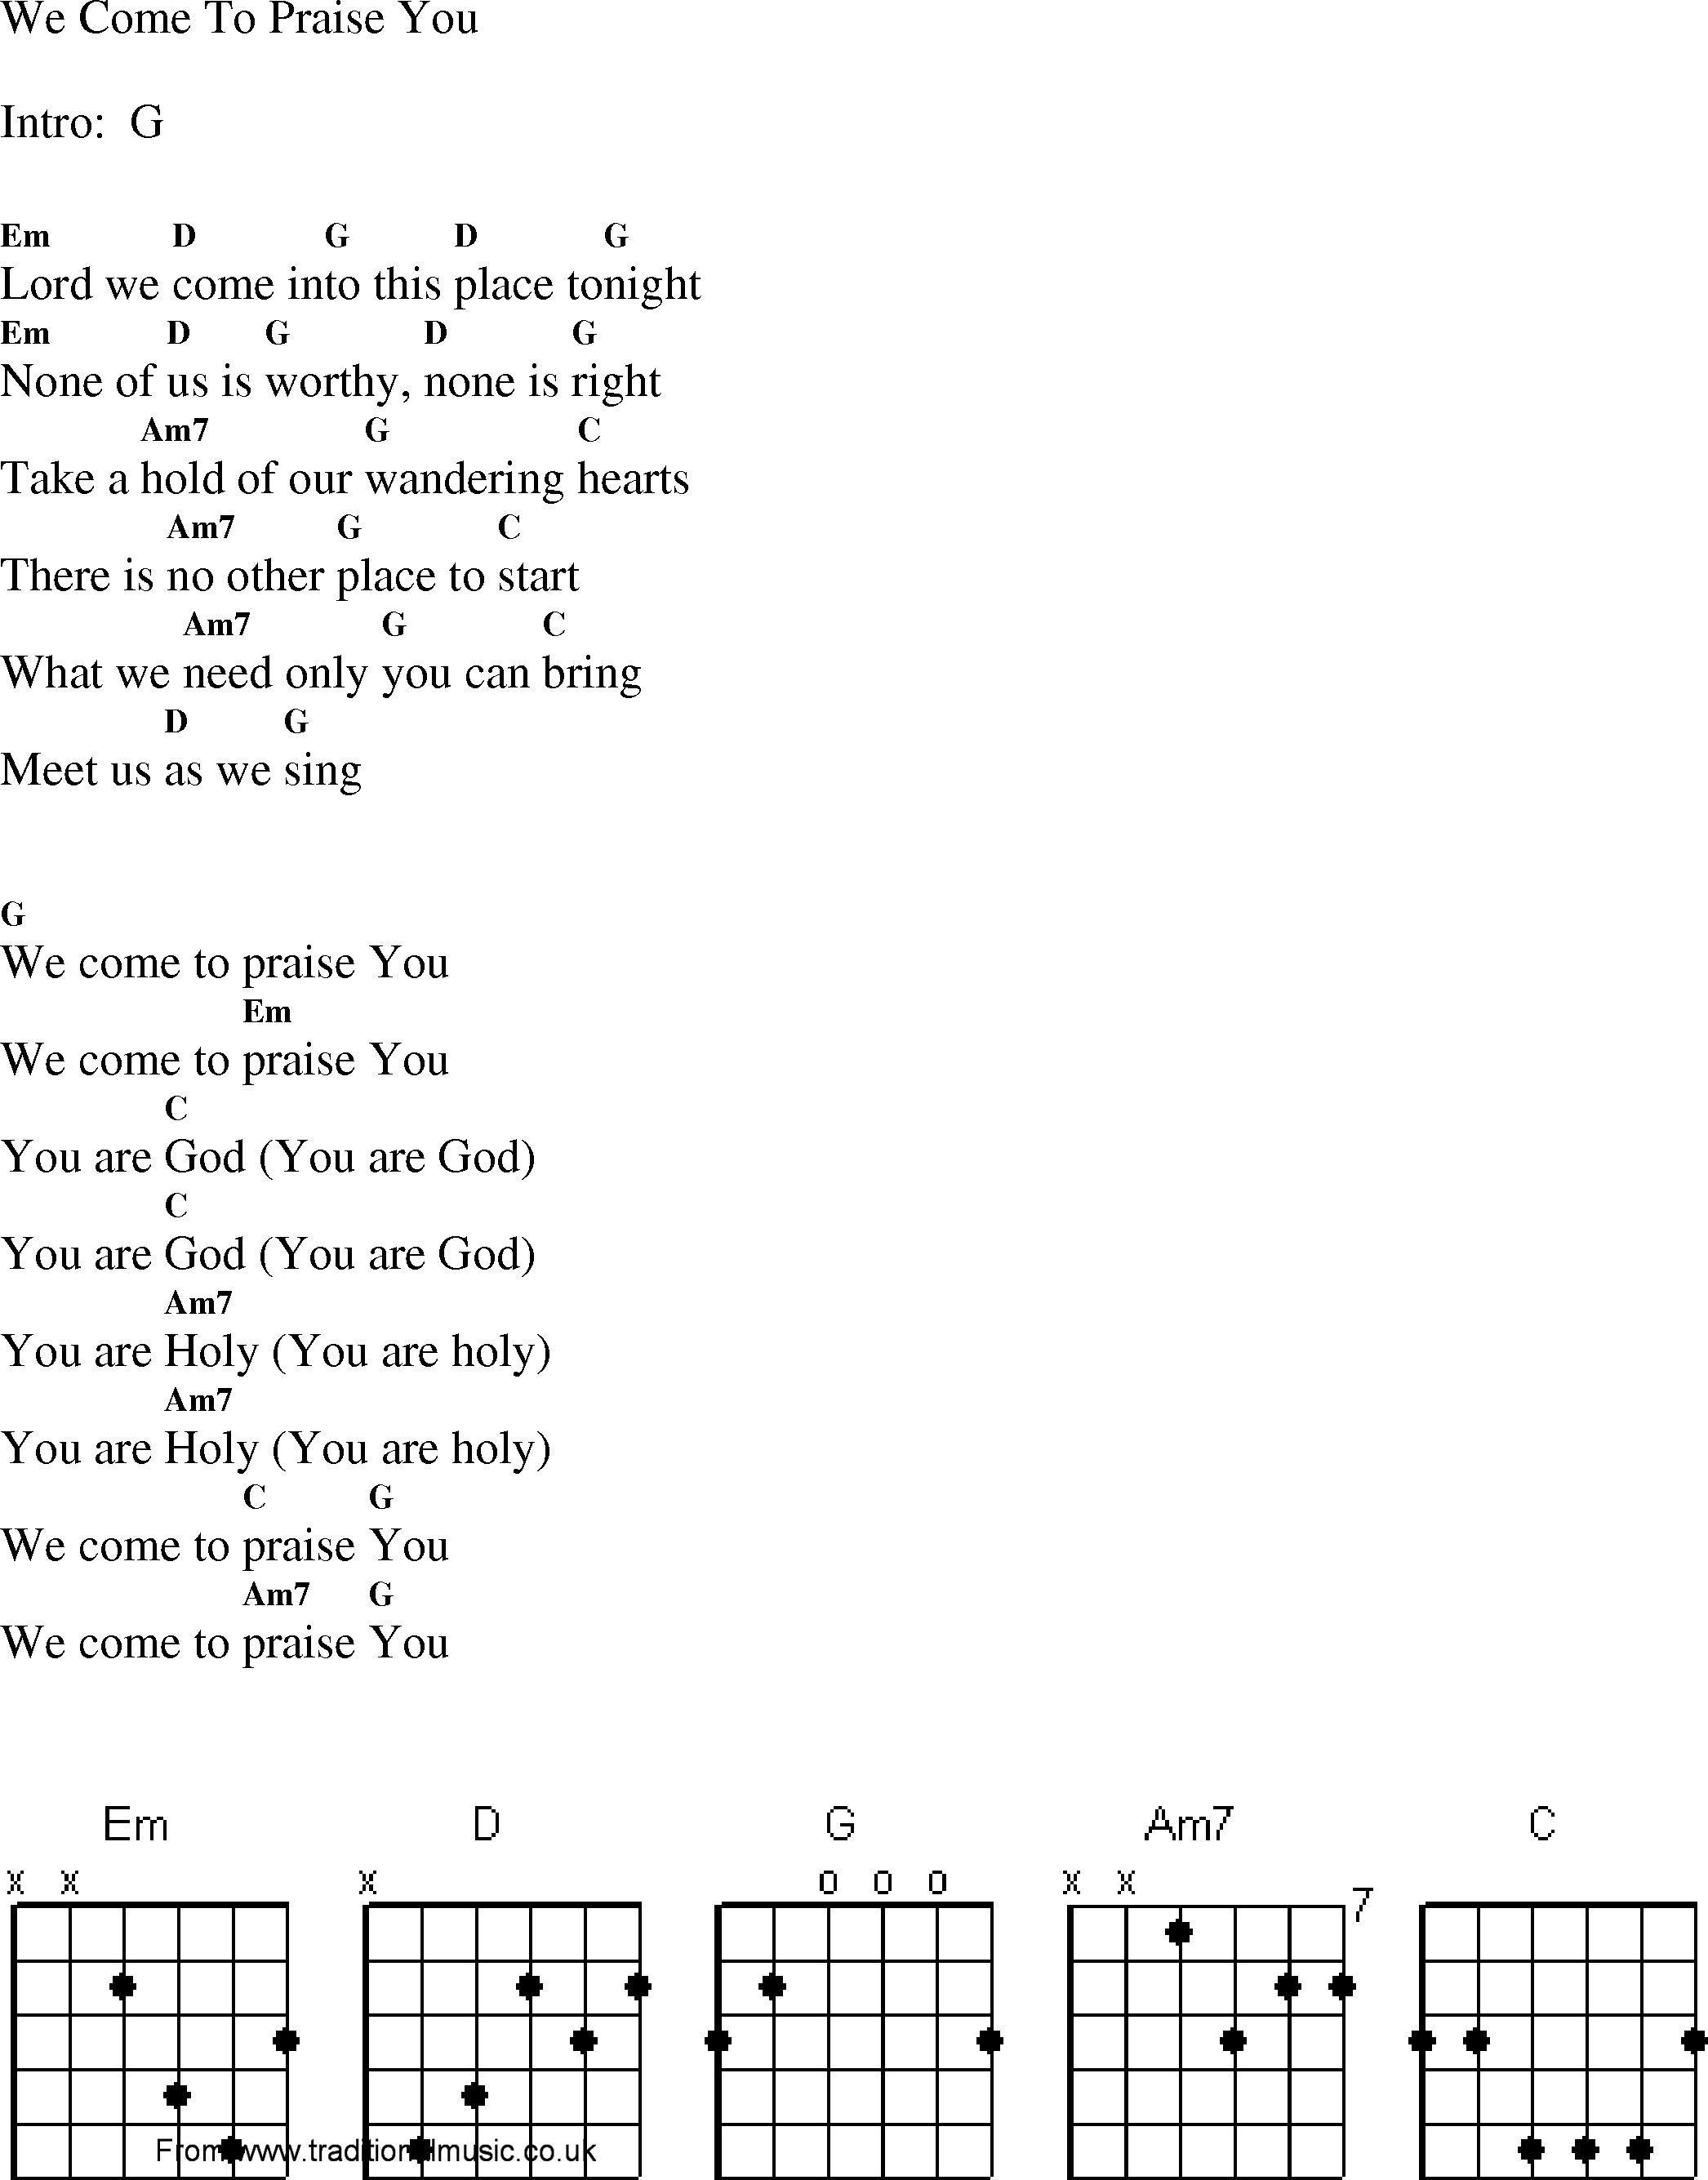 Gospel Song: we_come_to_praise_you, lyrics and chords.